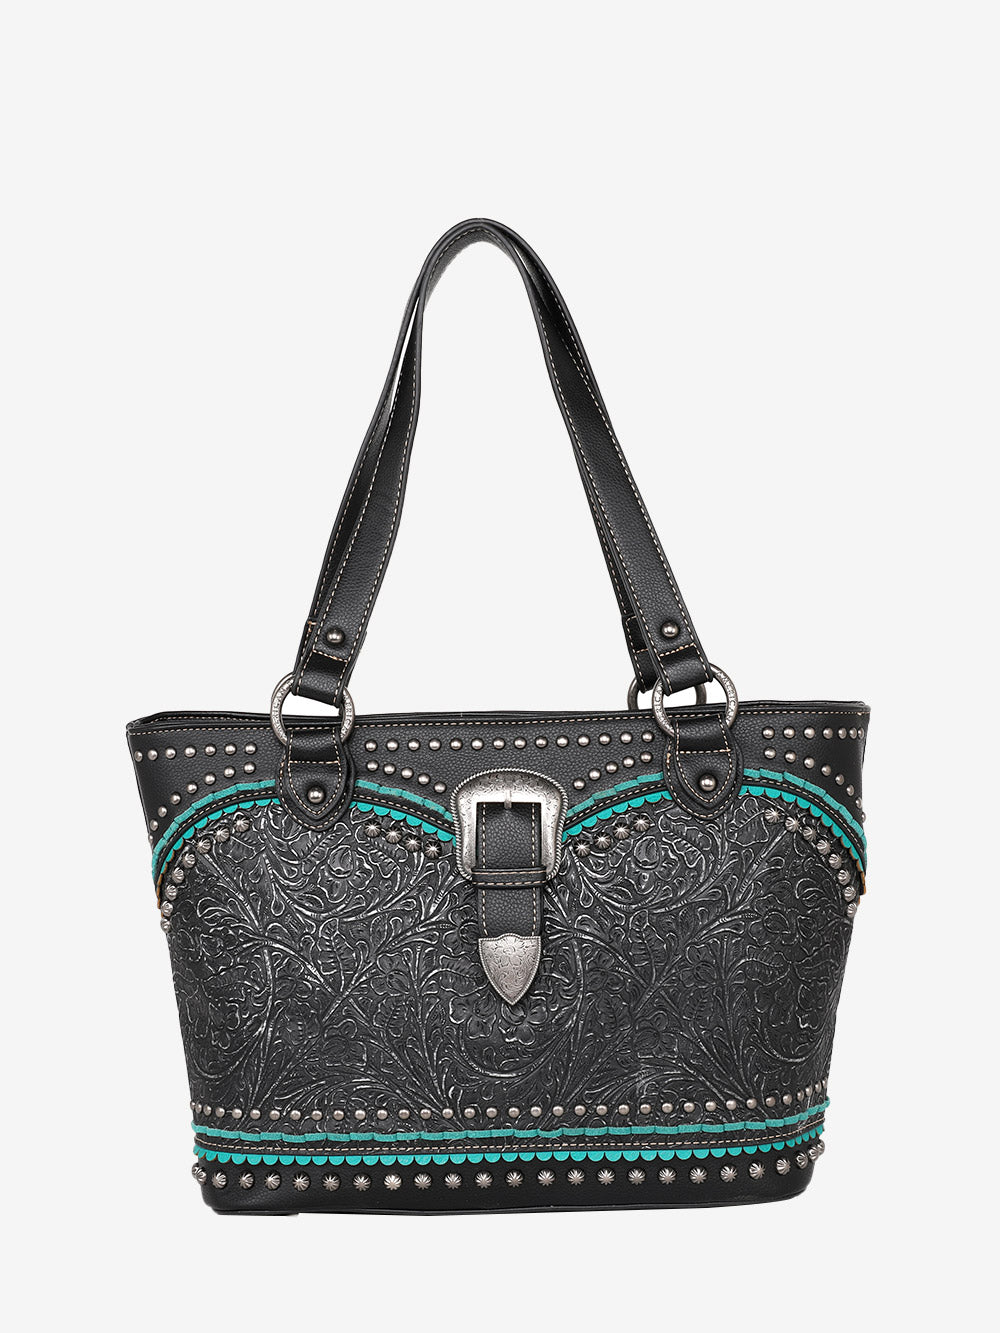 American Bling Black Embossed Floral Tote Set - Montana West World